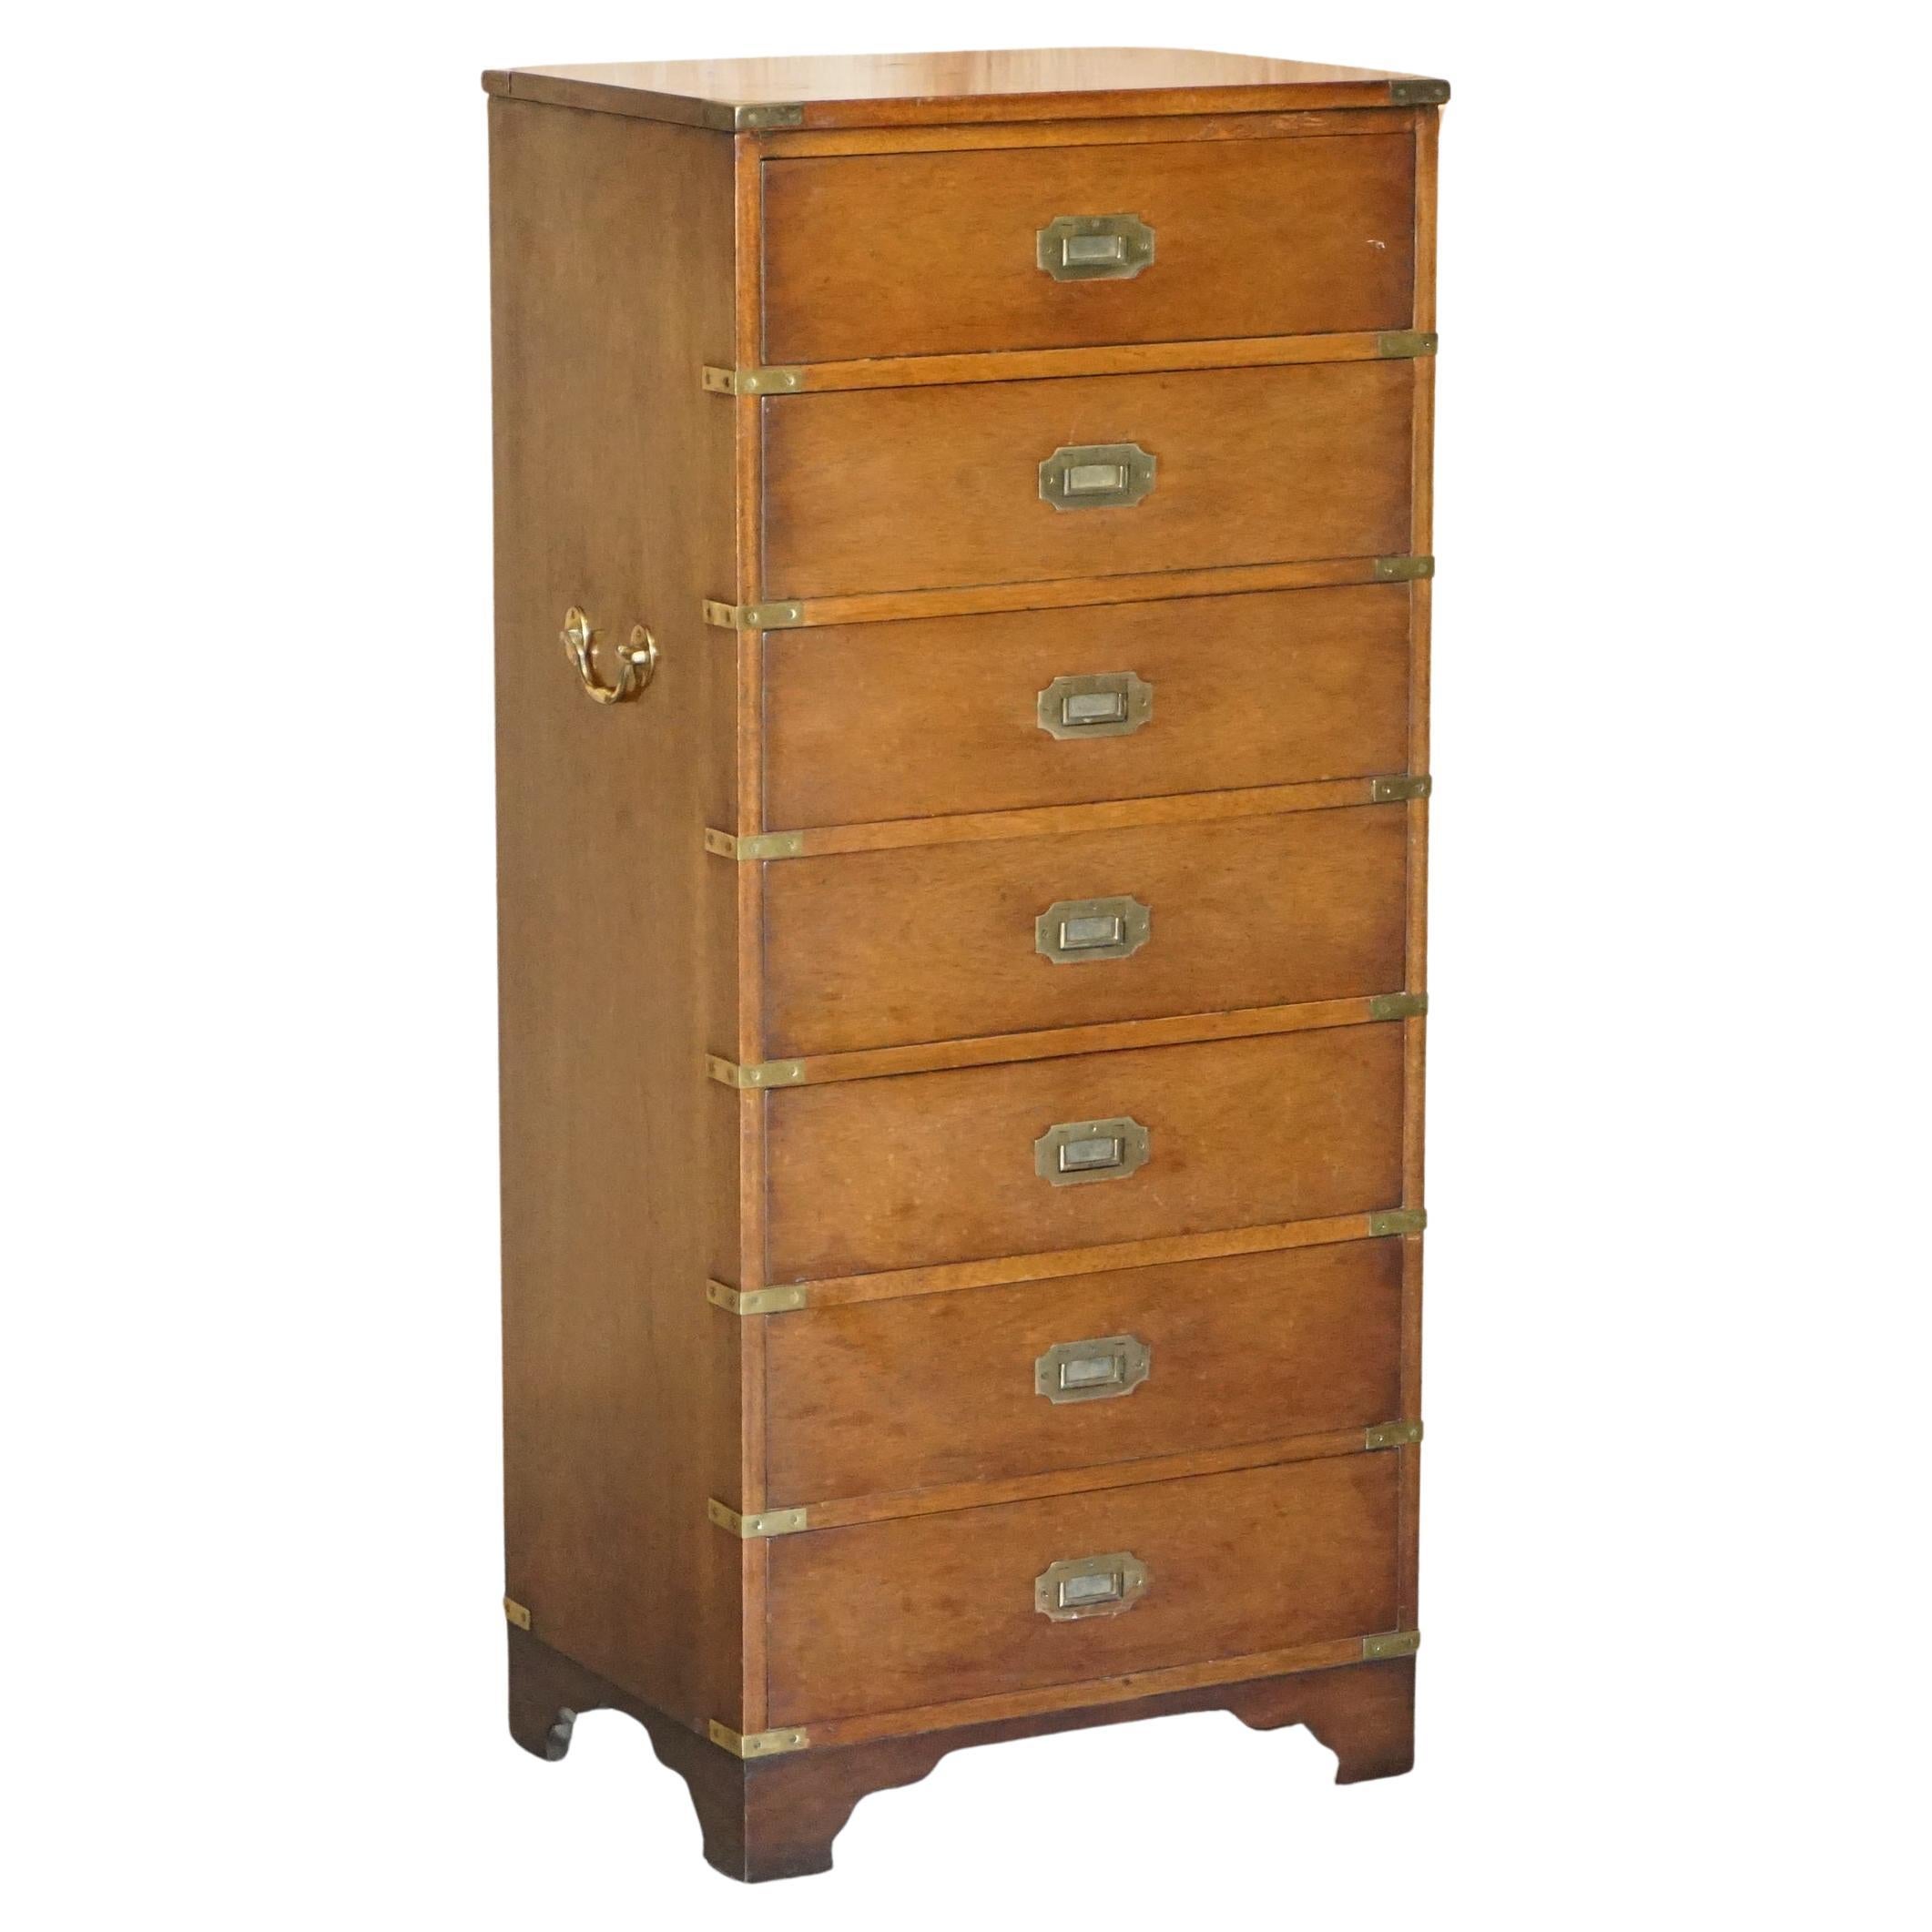 Vintage Military Campaign Tallboy Chest of Drawers in Light Hardwood Brass Trim